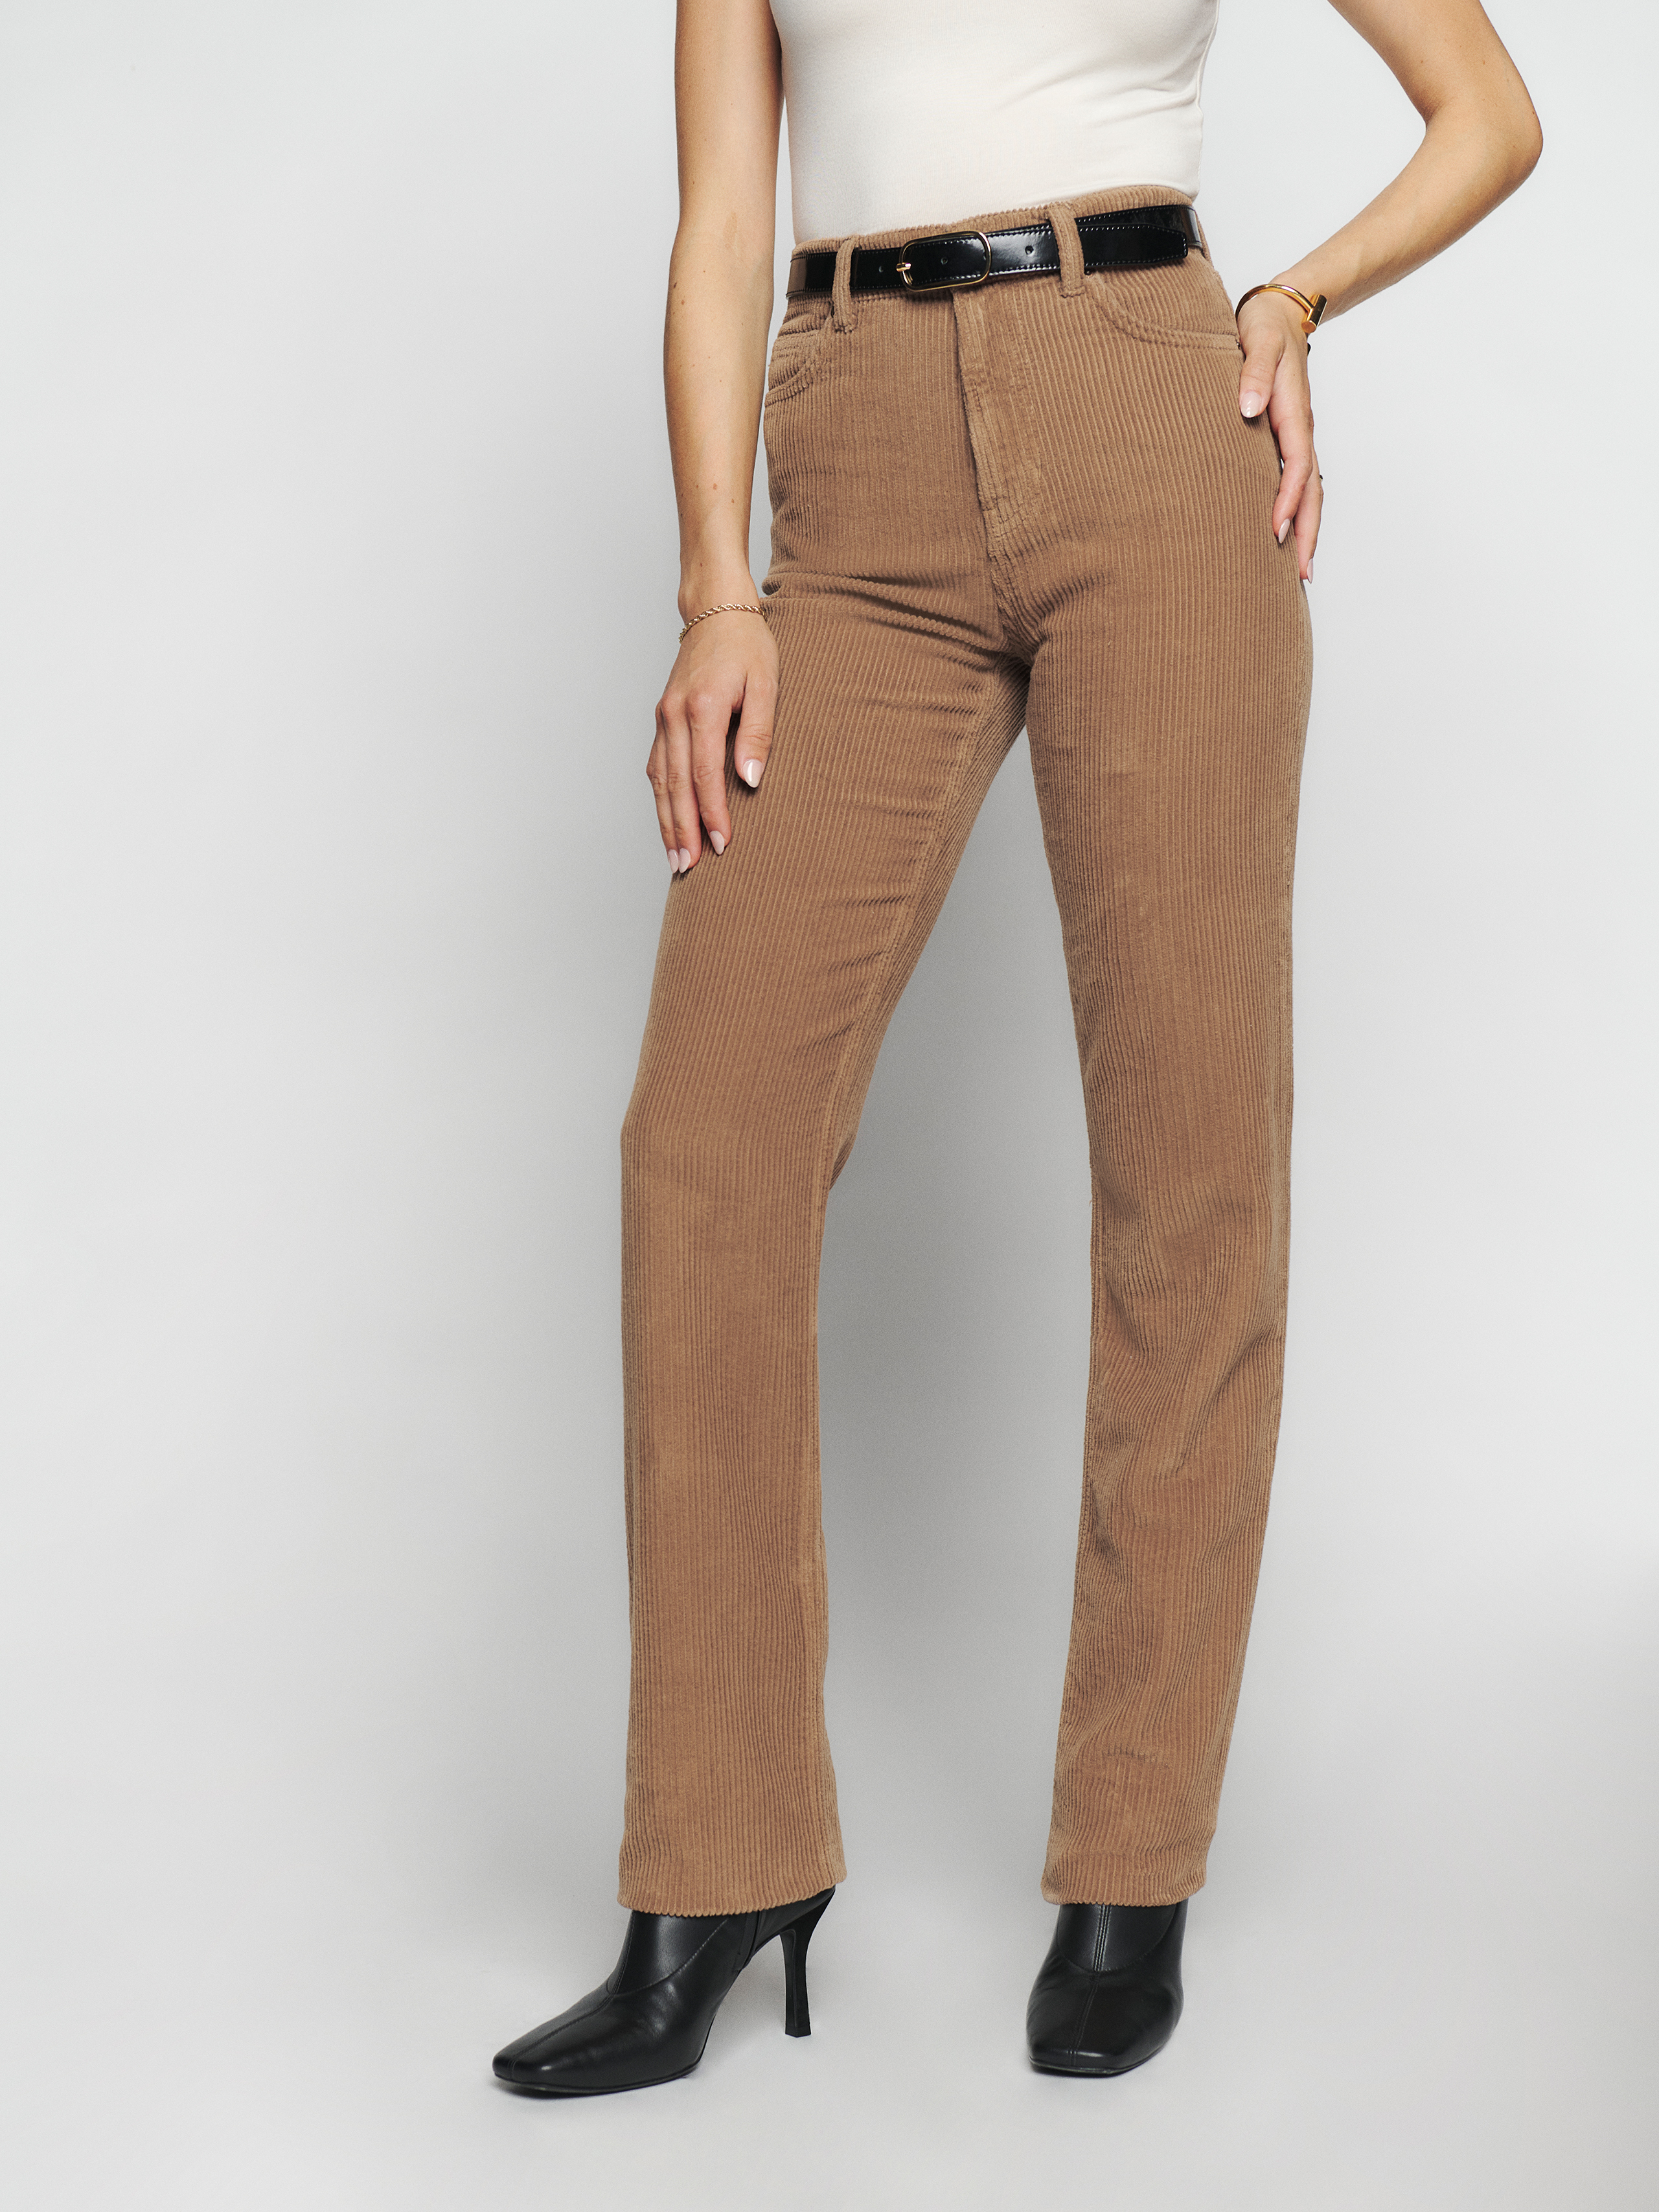 Corduroy-Pant Outfits: 6 Stylish Ways to Wear Them | Who What Wear